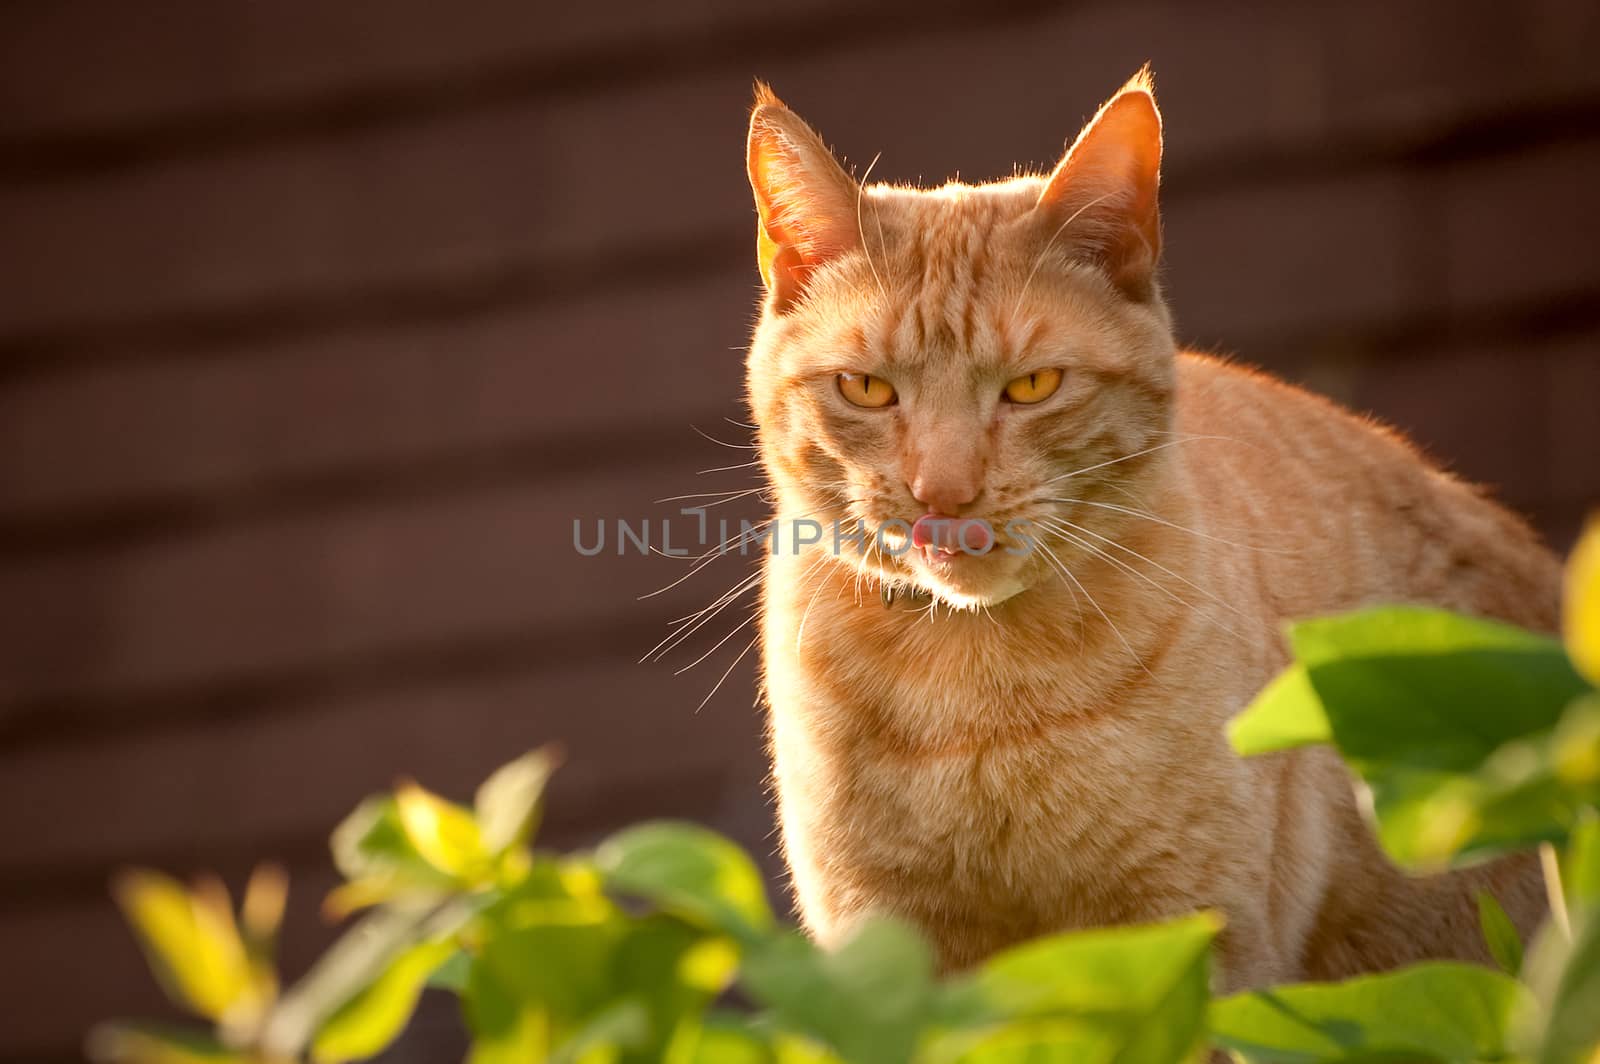 red tabby cat licking his lips after hunting